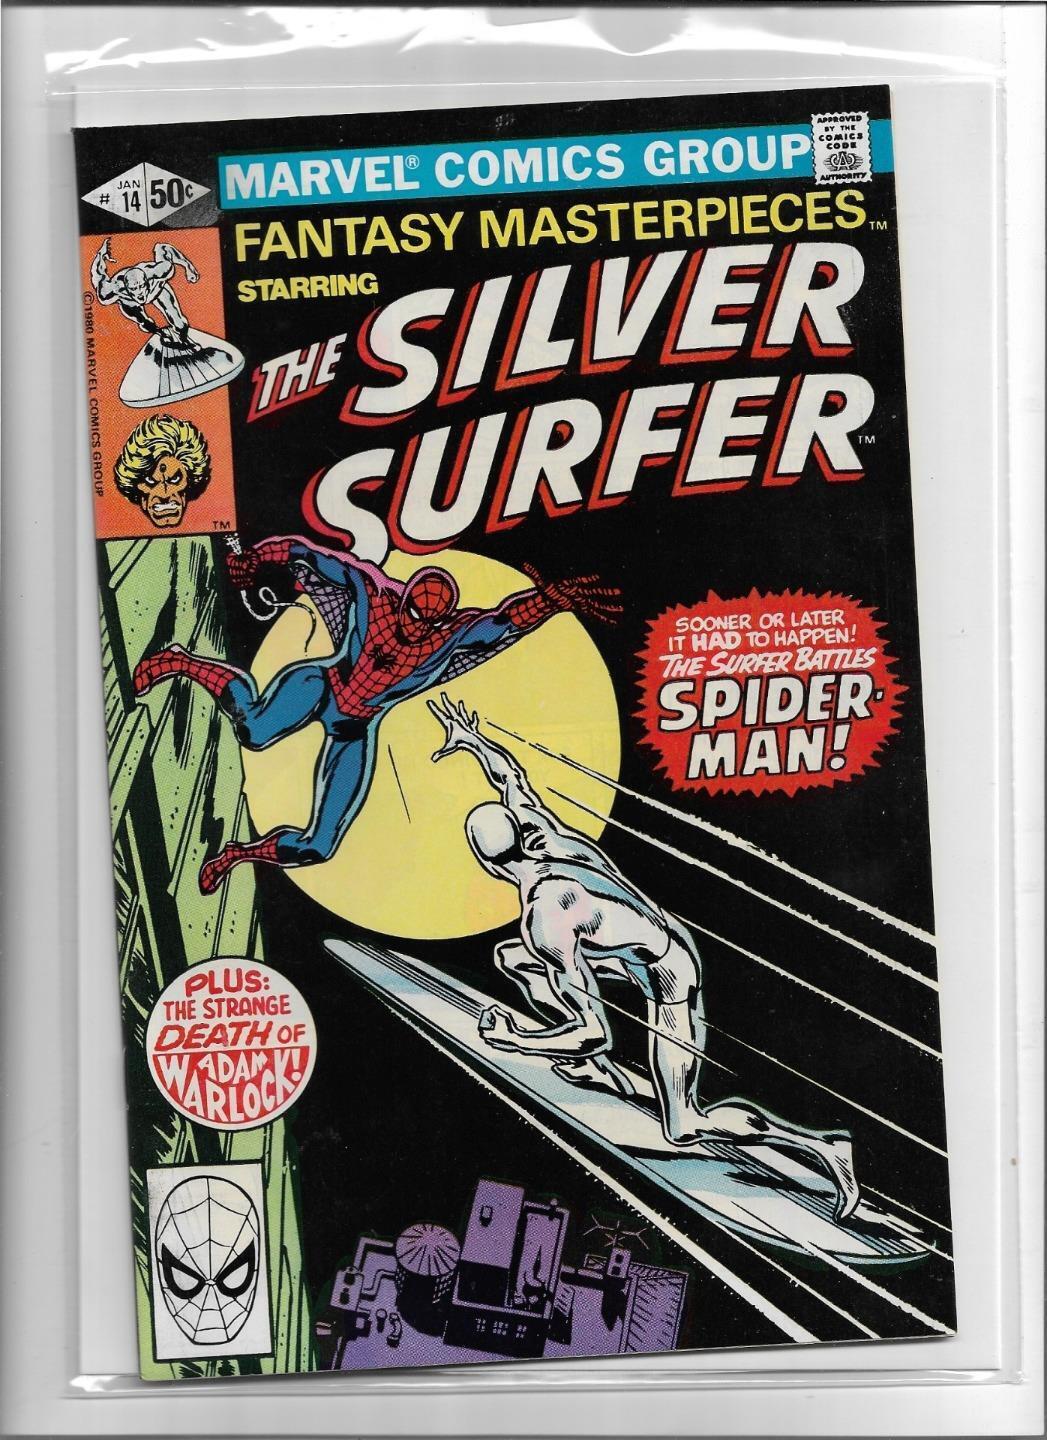 FANTASY MASTERPIECES STARRING THE SILVER SURFER #14 1981 VERY FINE 8.0 4681